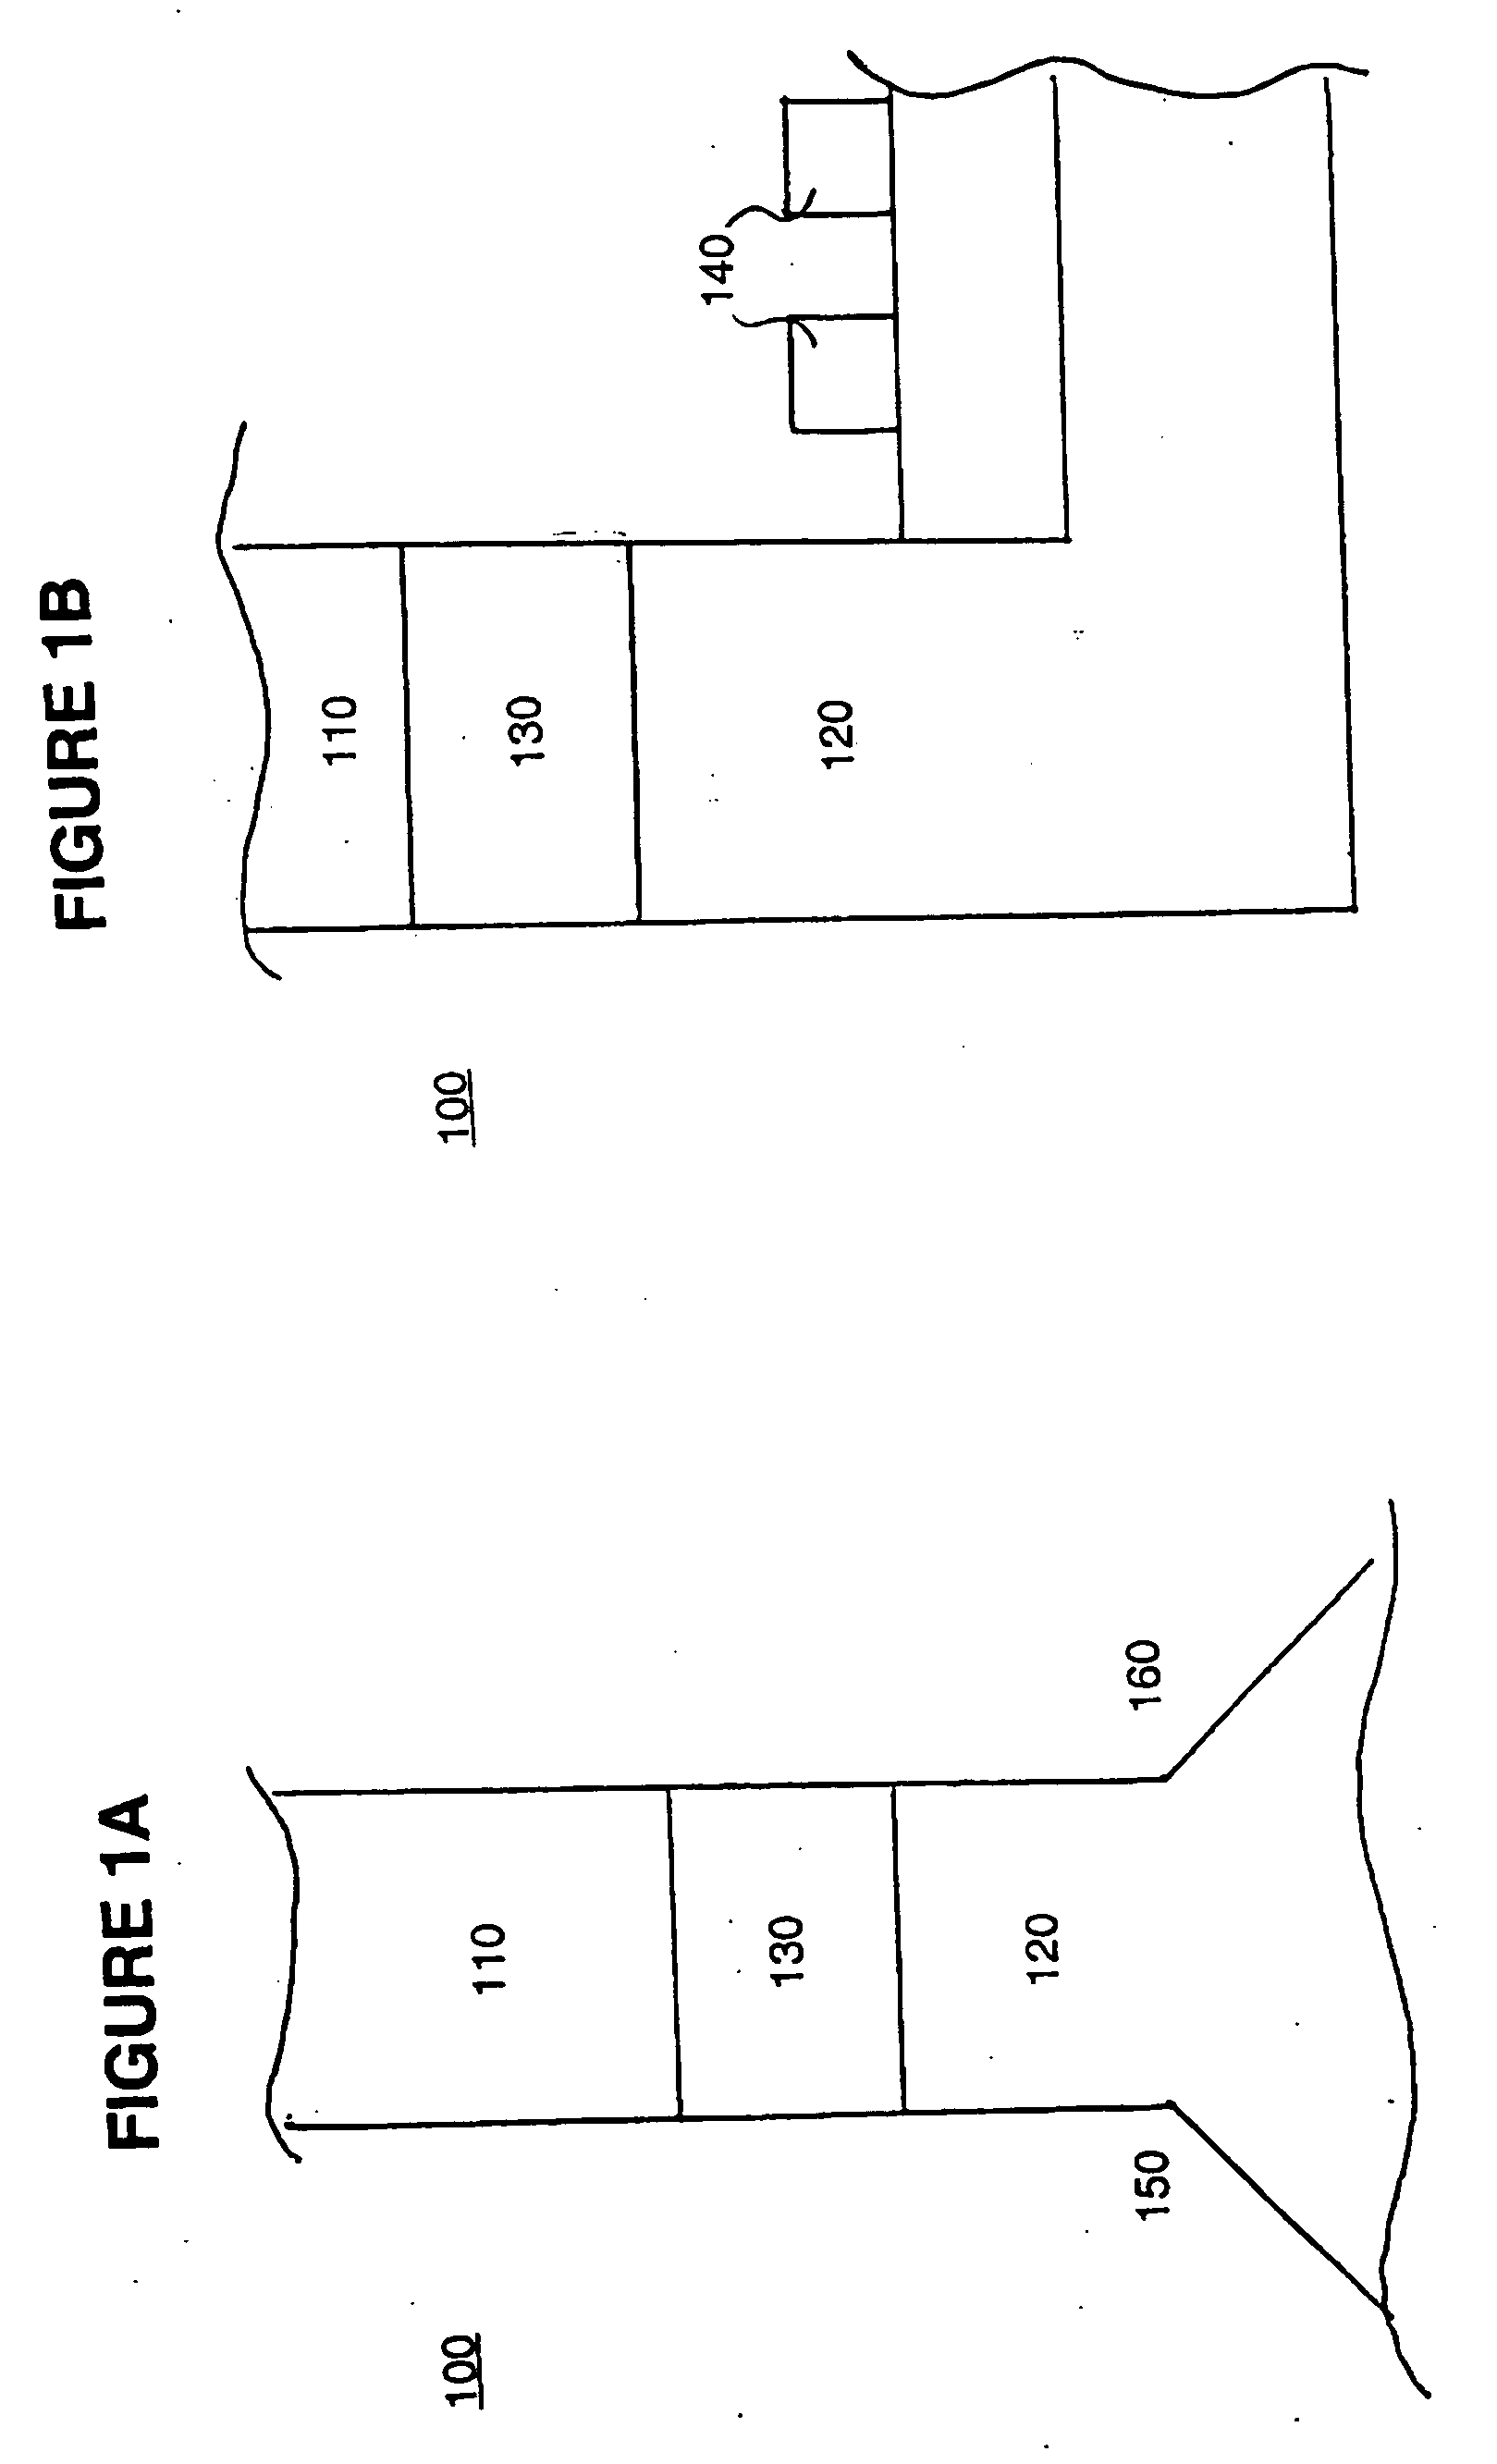 Process for fabricating a magnetic recording head with a laminated write gap